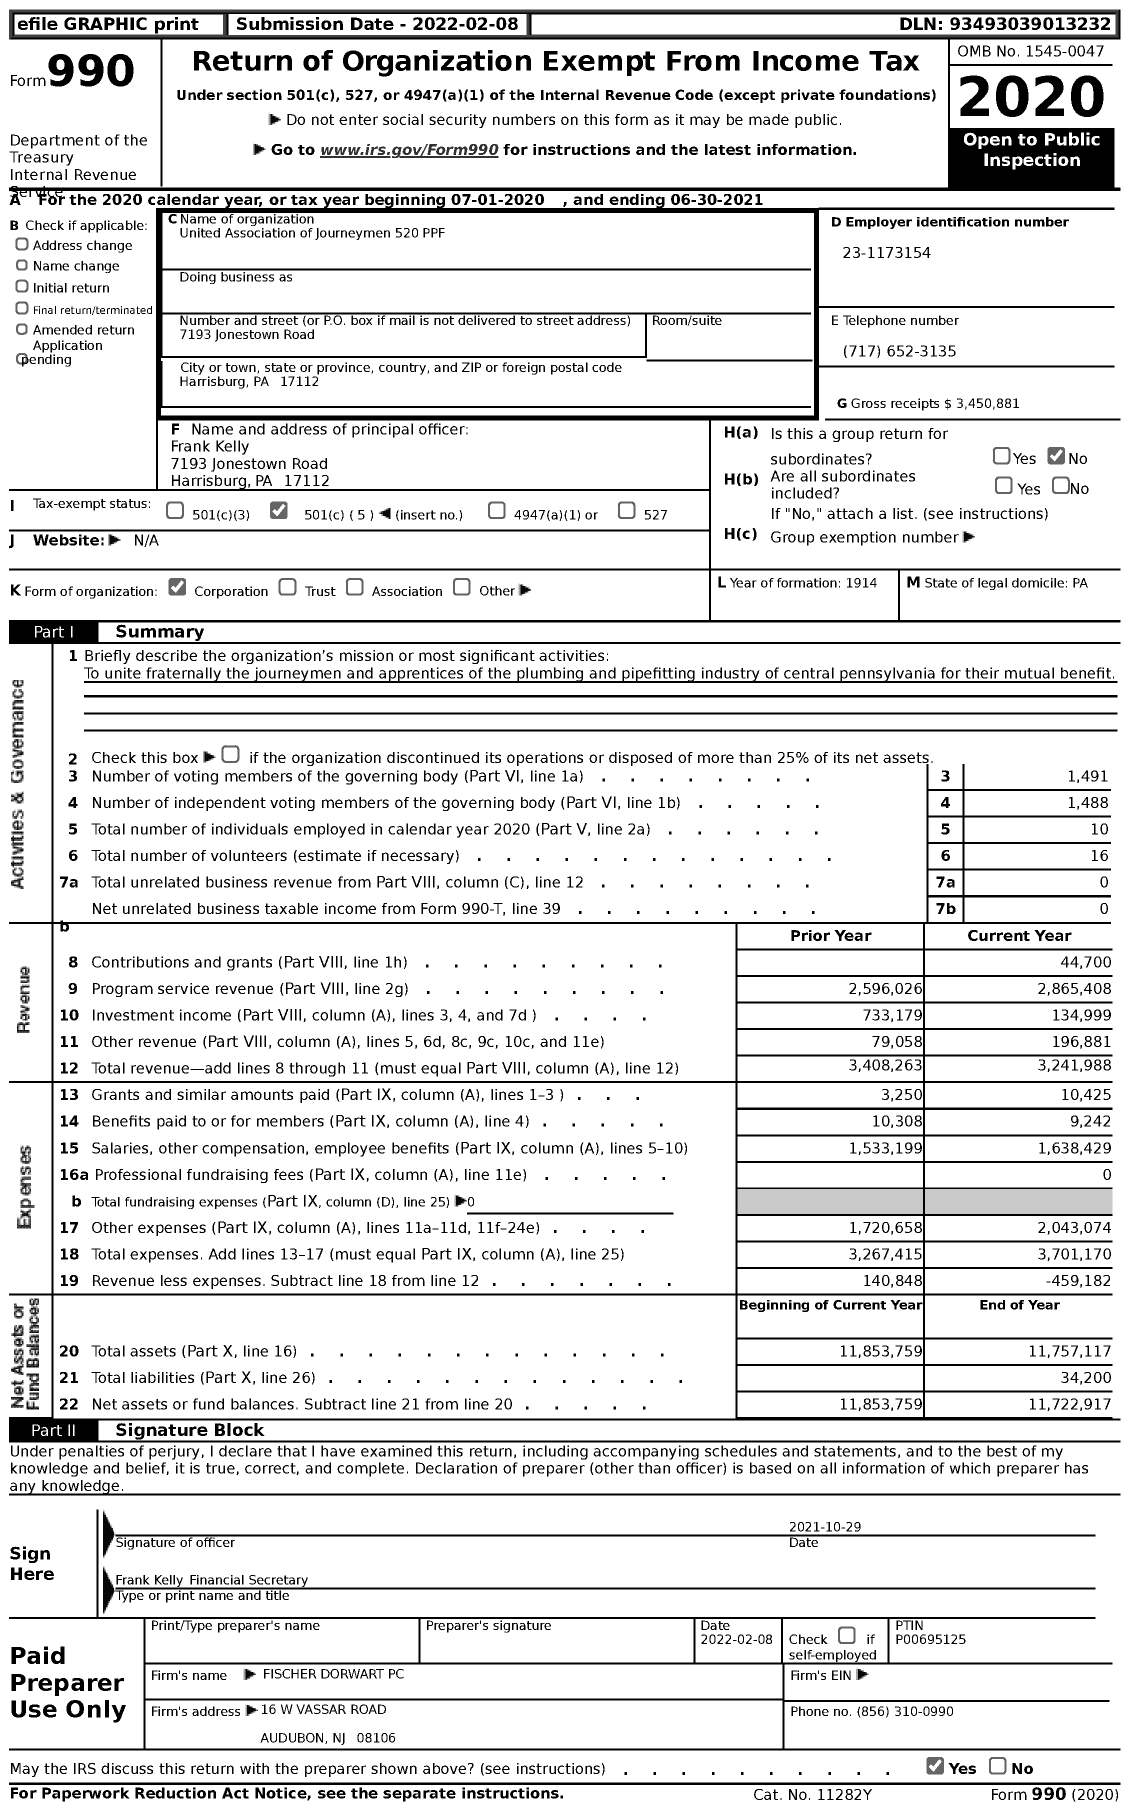 Image of first page of 2020 Form 990 for United Association - 520 PPF